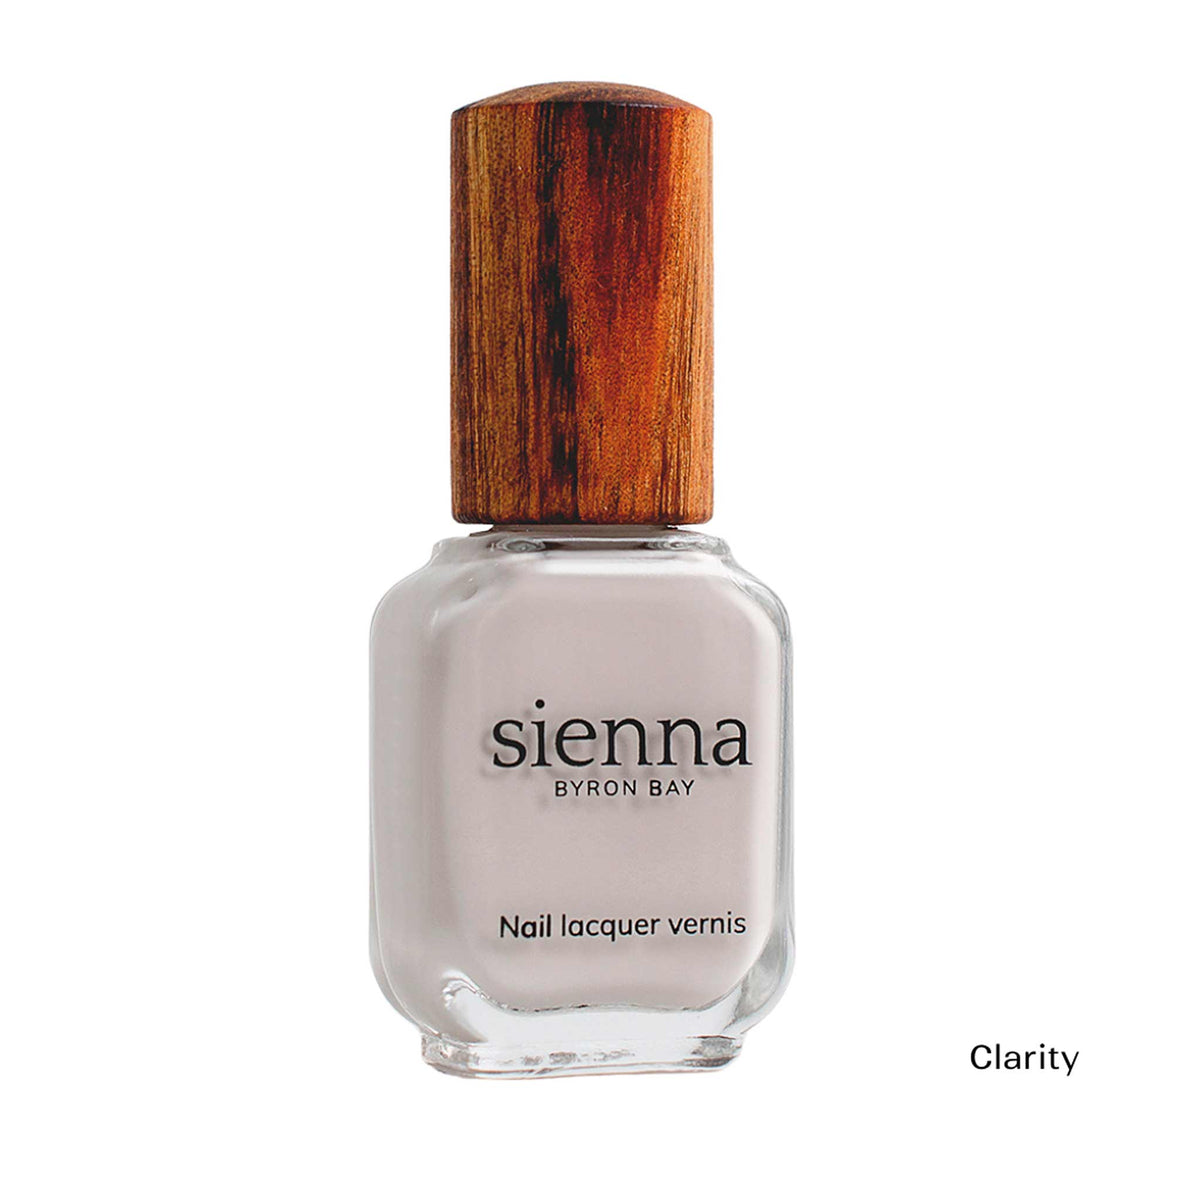 Nail Lacquer Vernis